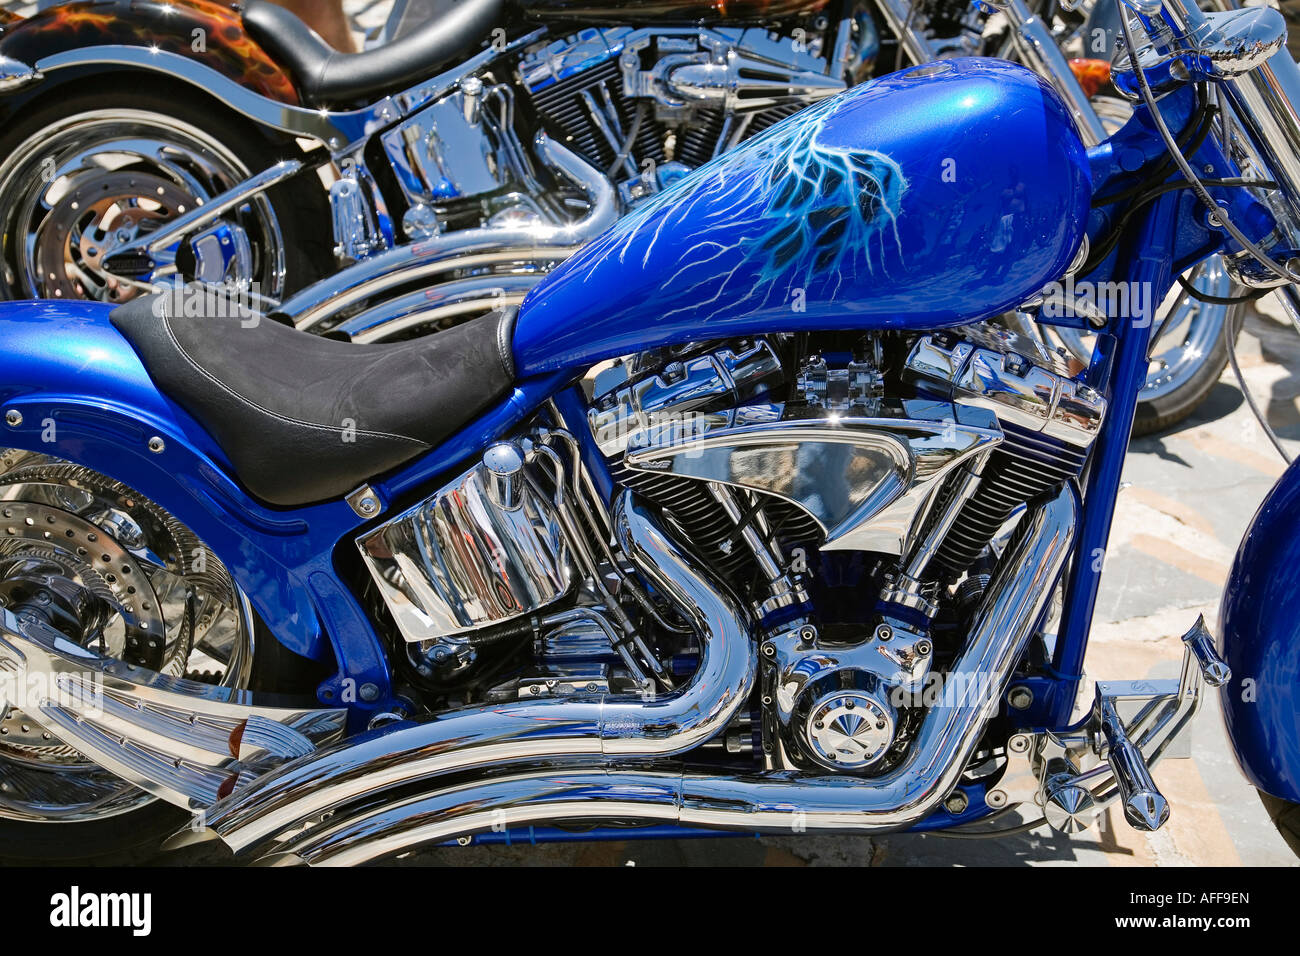 detail of a motorcycle harley davidson Stock Photo